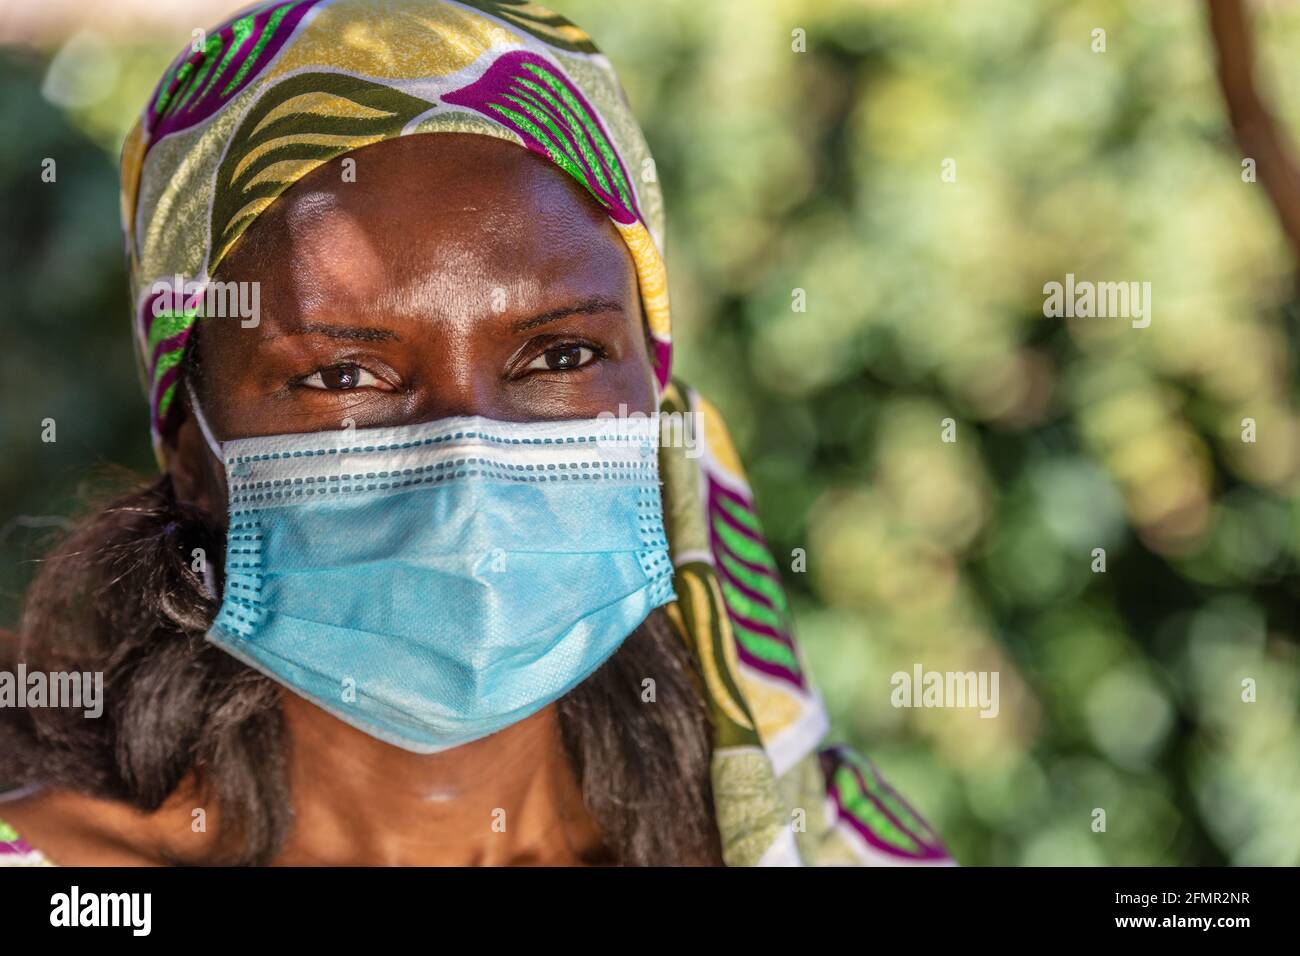 African middle aged woman, female in Africa, wearing traditional clothes and face mask in Coronavirus COVID-19 pandemic Stock Photo